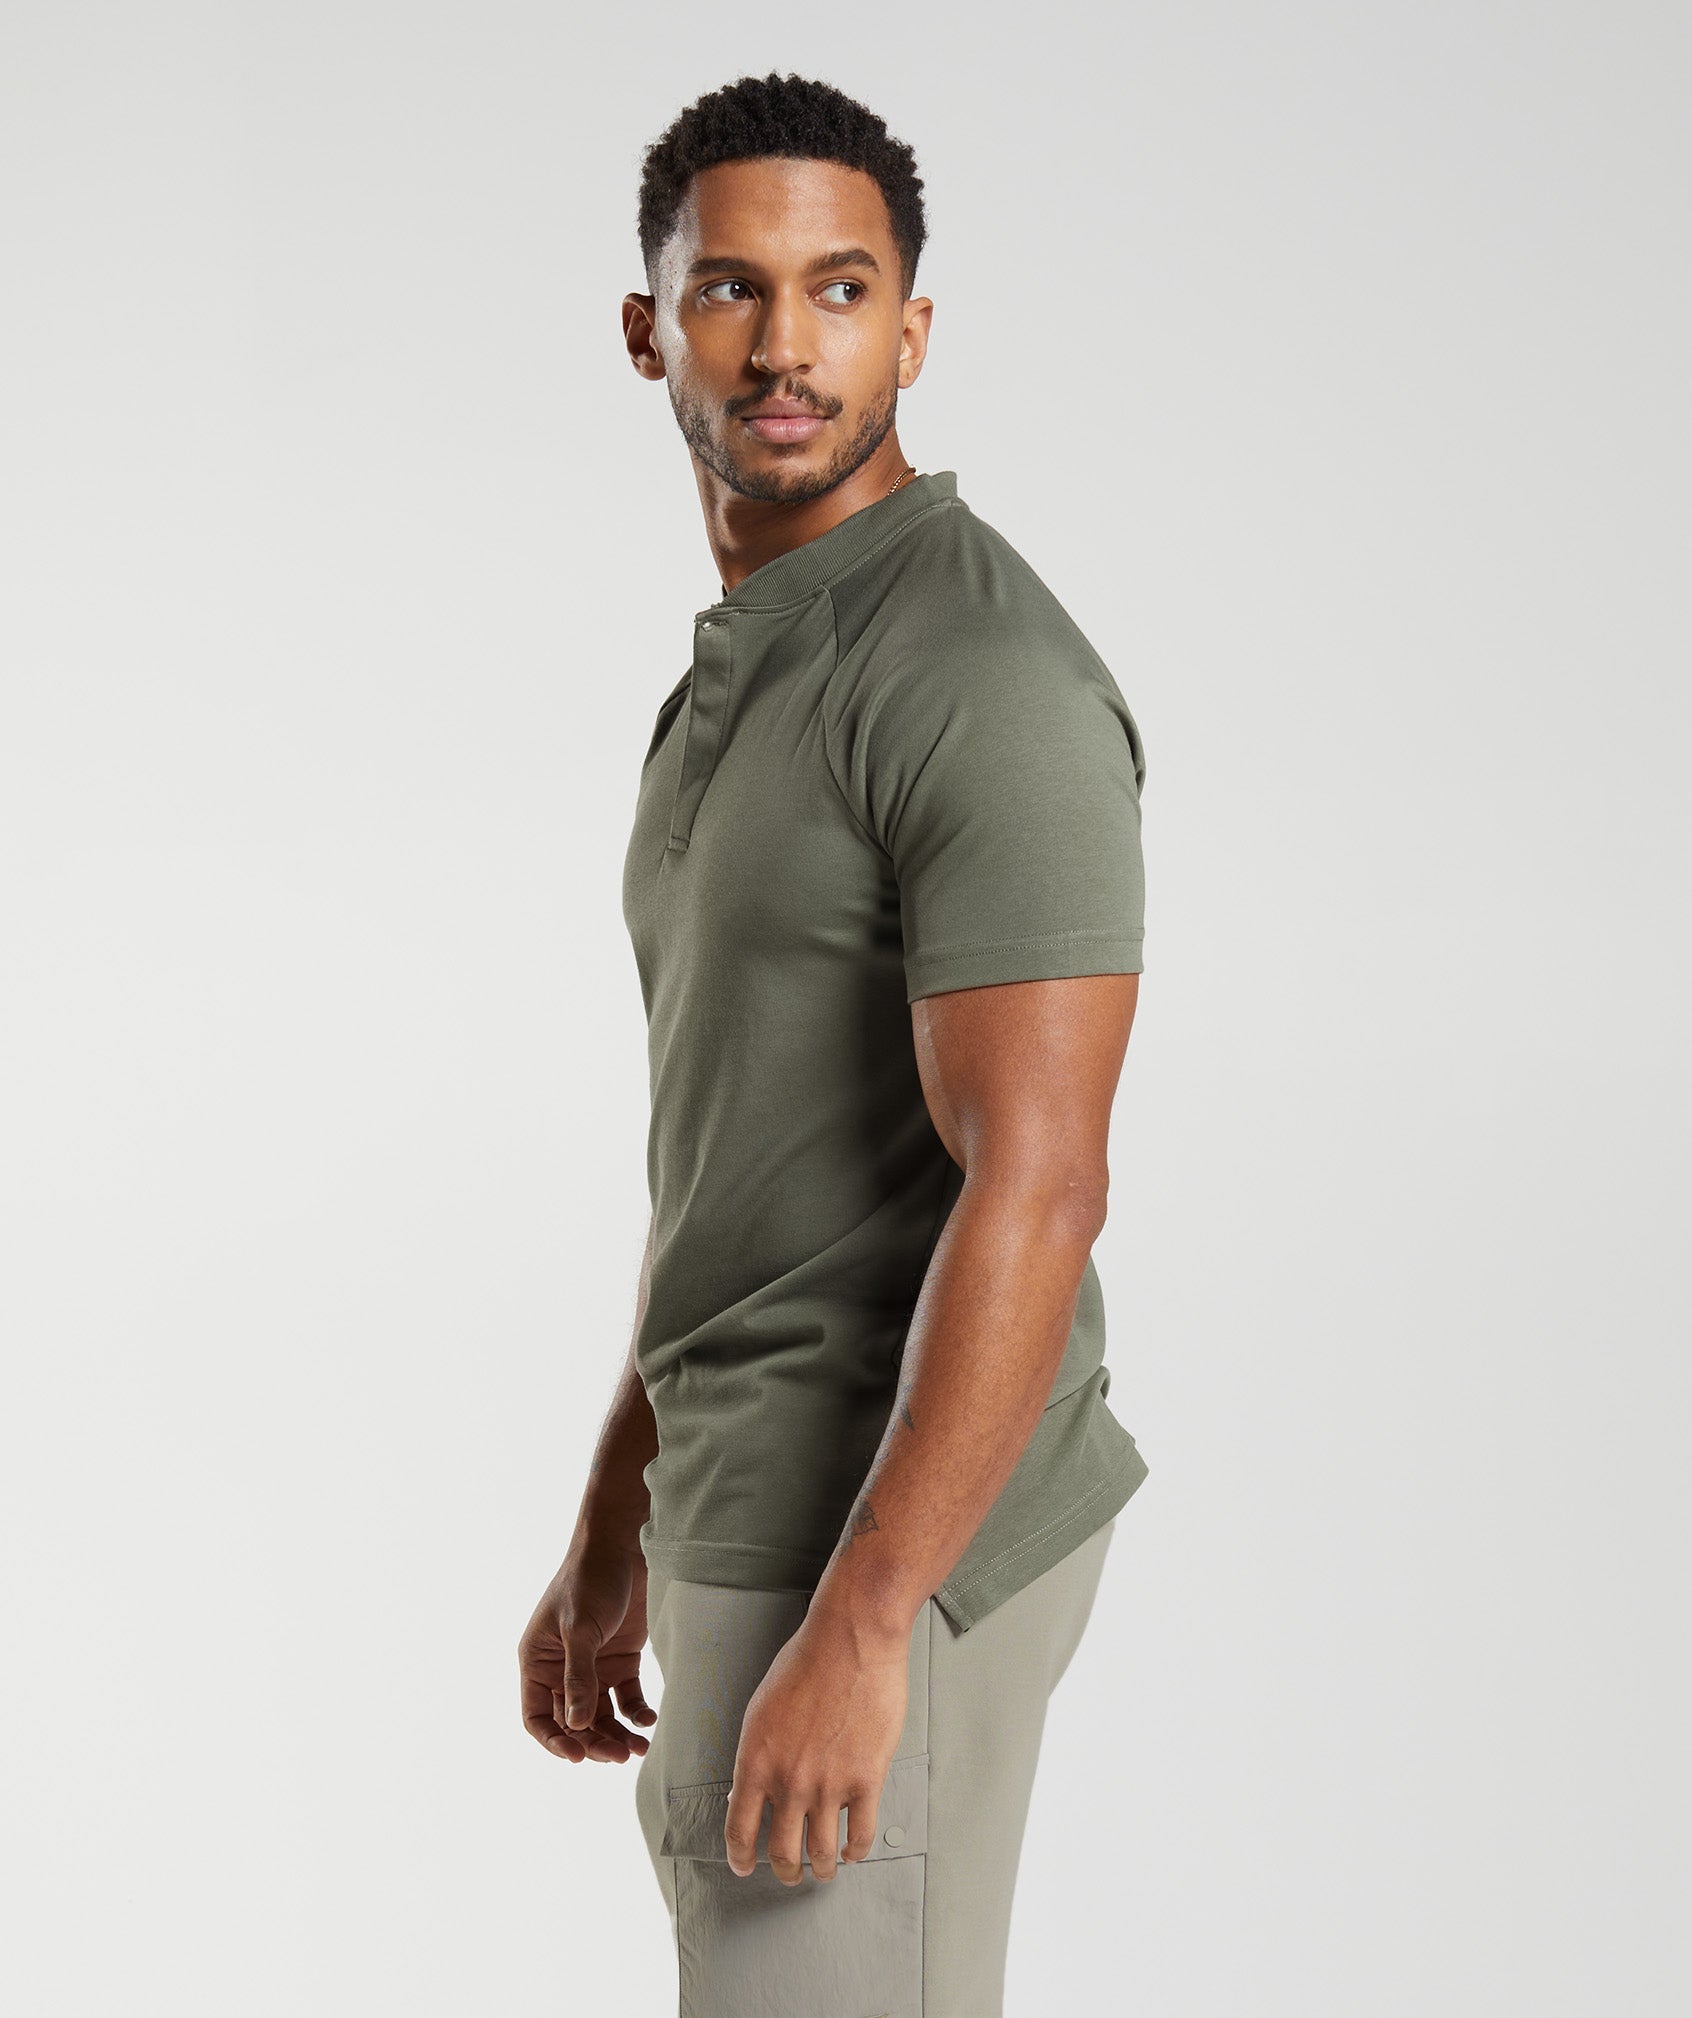 Rest Day Commute Polo Shirt in Dusty Olive